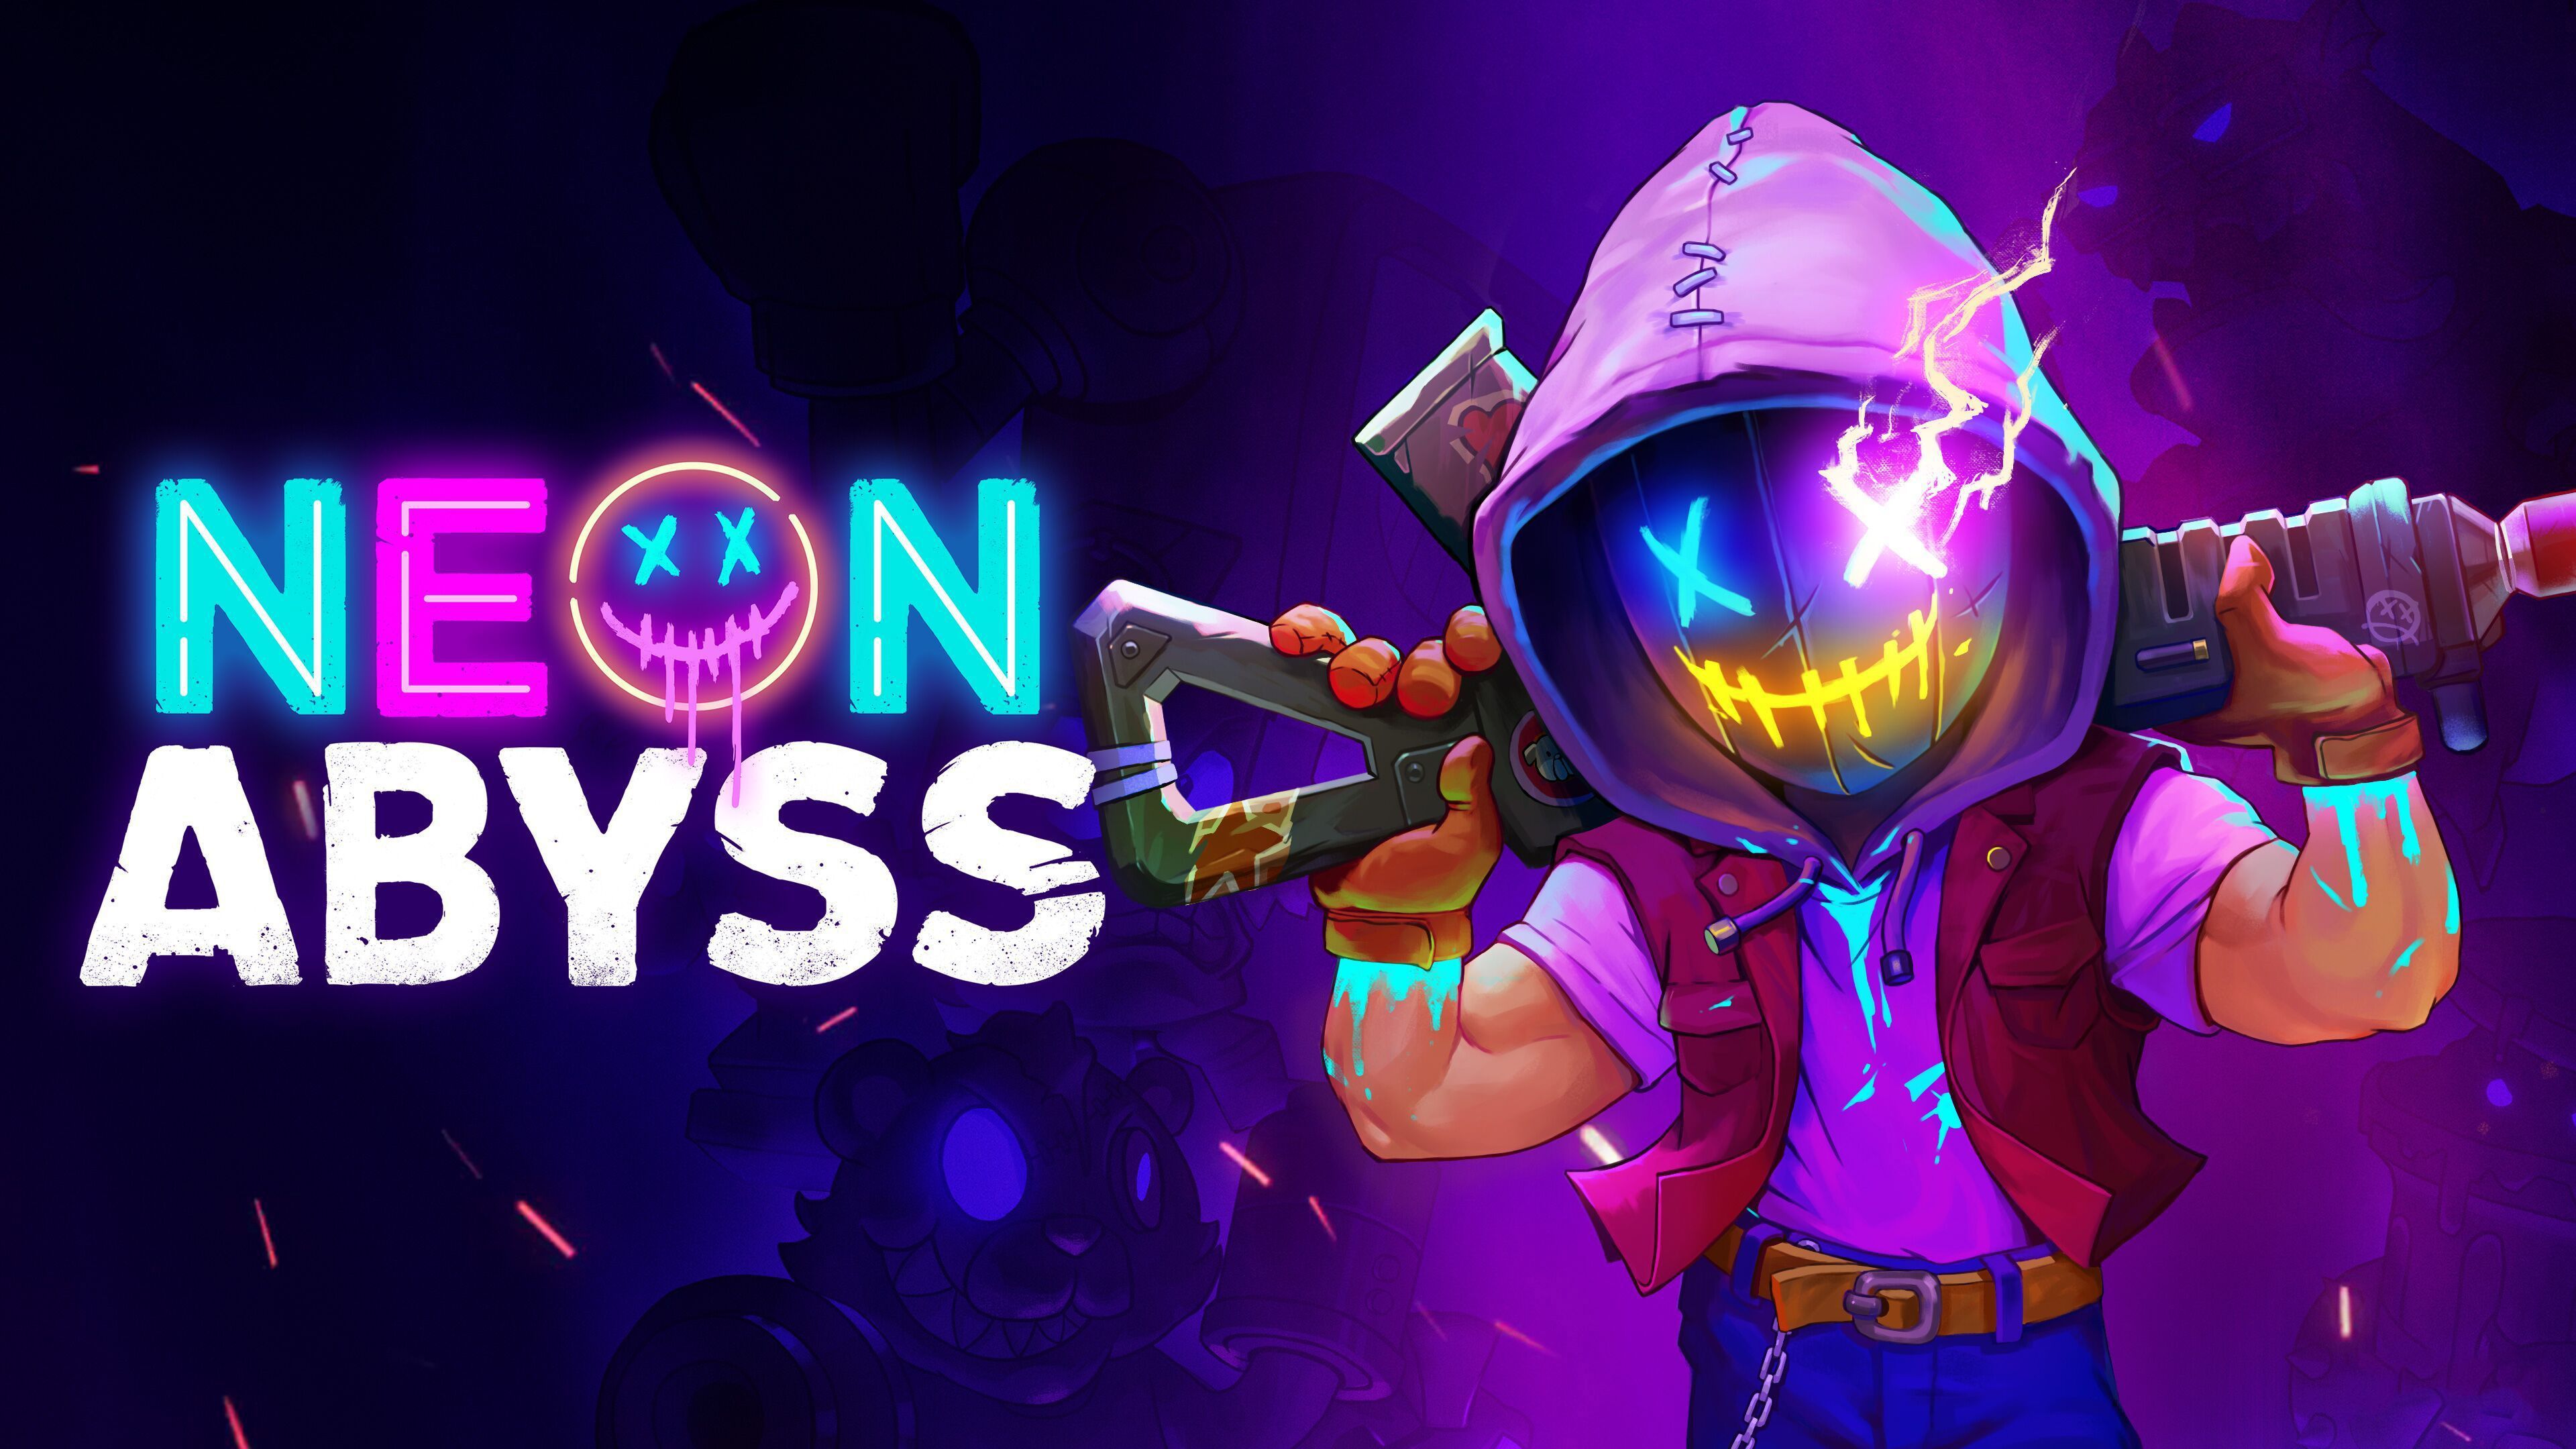 Neon Abyss 4K Wallpaper, PlayStation Xbox One, Nintendo Switch, PC Games, 2020 Games, Games